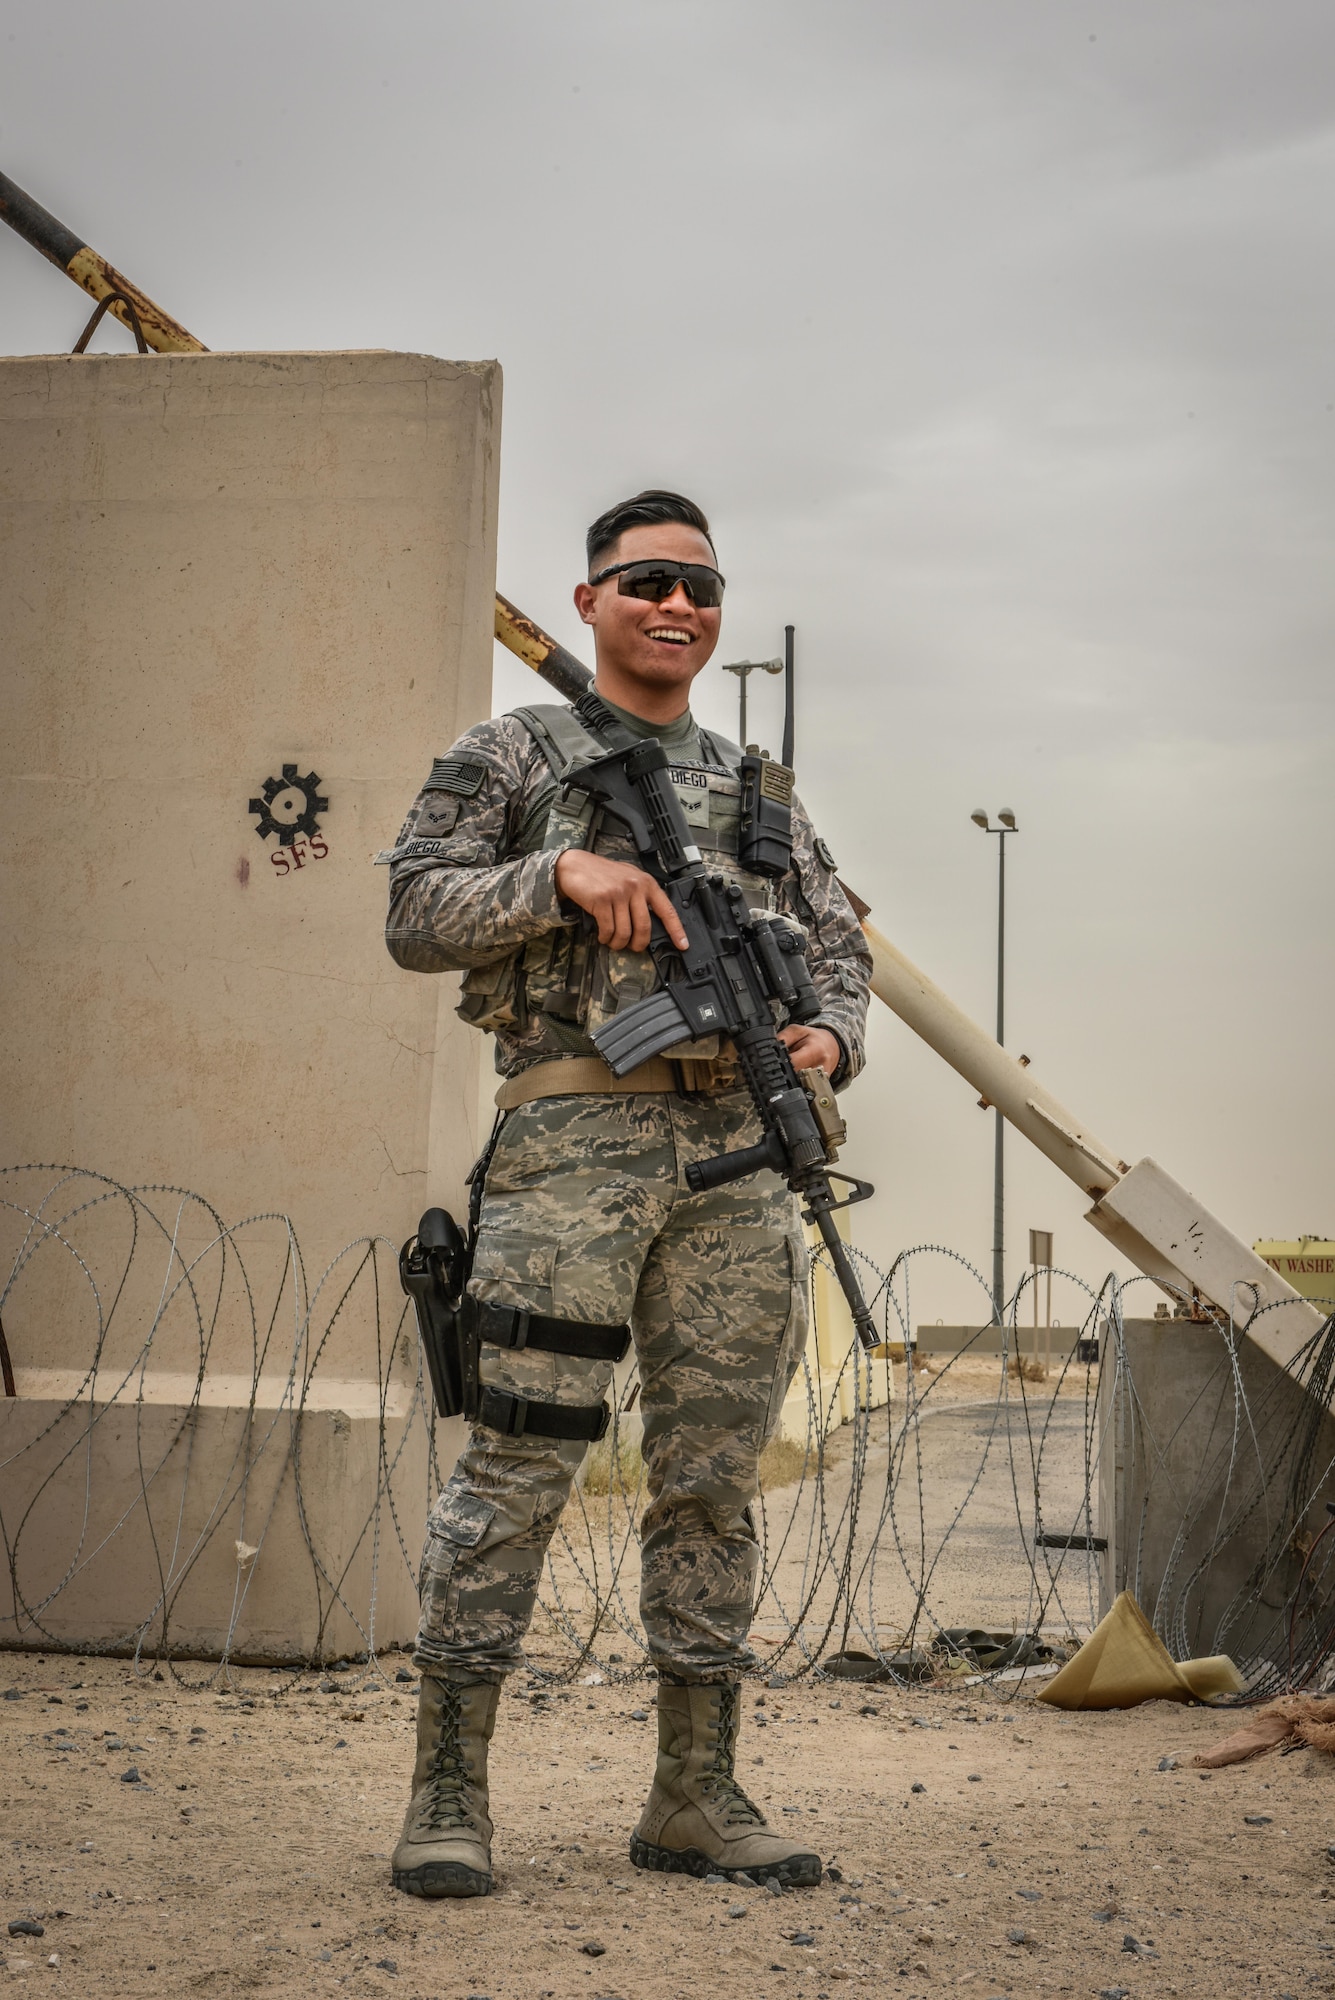 U.S. Air National Guard Airman 1st Class Randall Diego, a security forces member with the 407th Expeditionary Security Forces Squadron, smiles for a photo May 13, 2017, in Southwest Asia. Randall is a member of the 254th Security Forces Squadron at Andersen Air Force Base and volunteered for his first deployment right out of technical training. He is part of a team of Guam service members who deployed to the 407th AEG in support of Operation Inherent Resolve. (U.S. Air Force photo by Senior Airman Ramon Adelan)